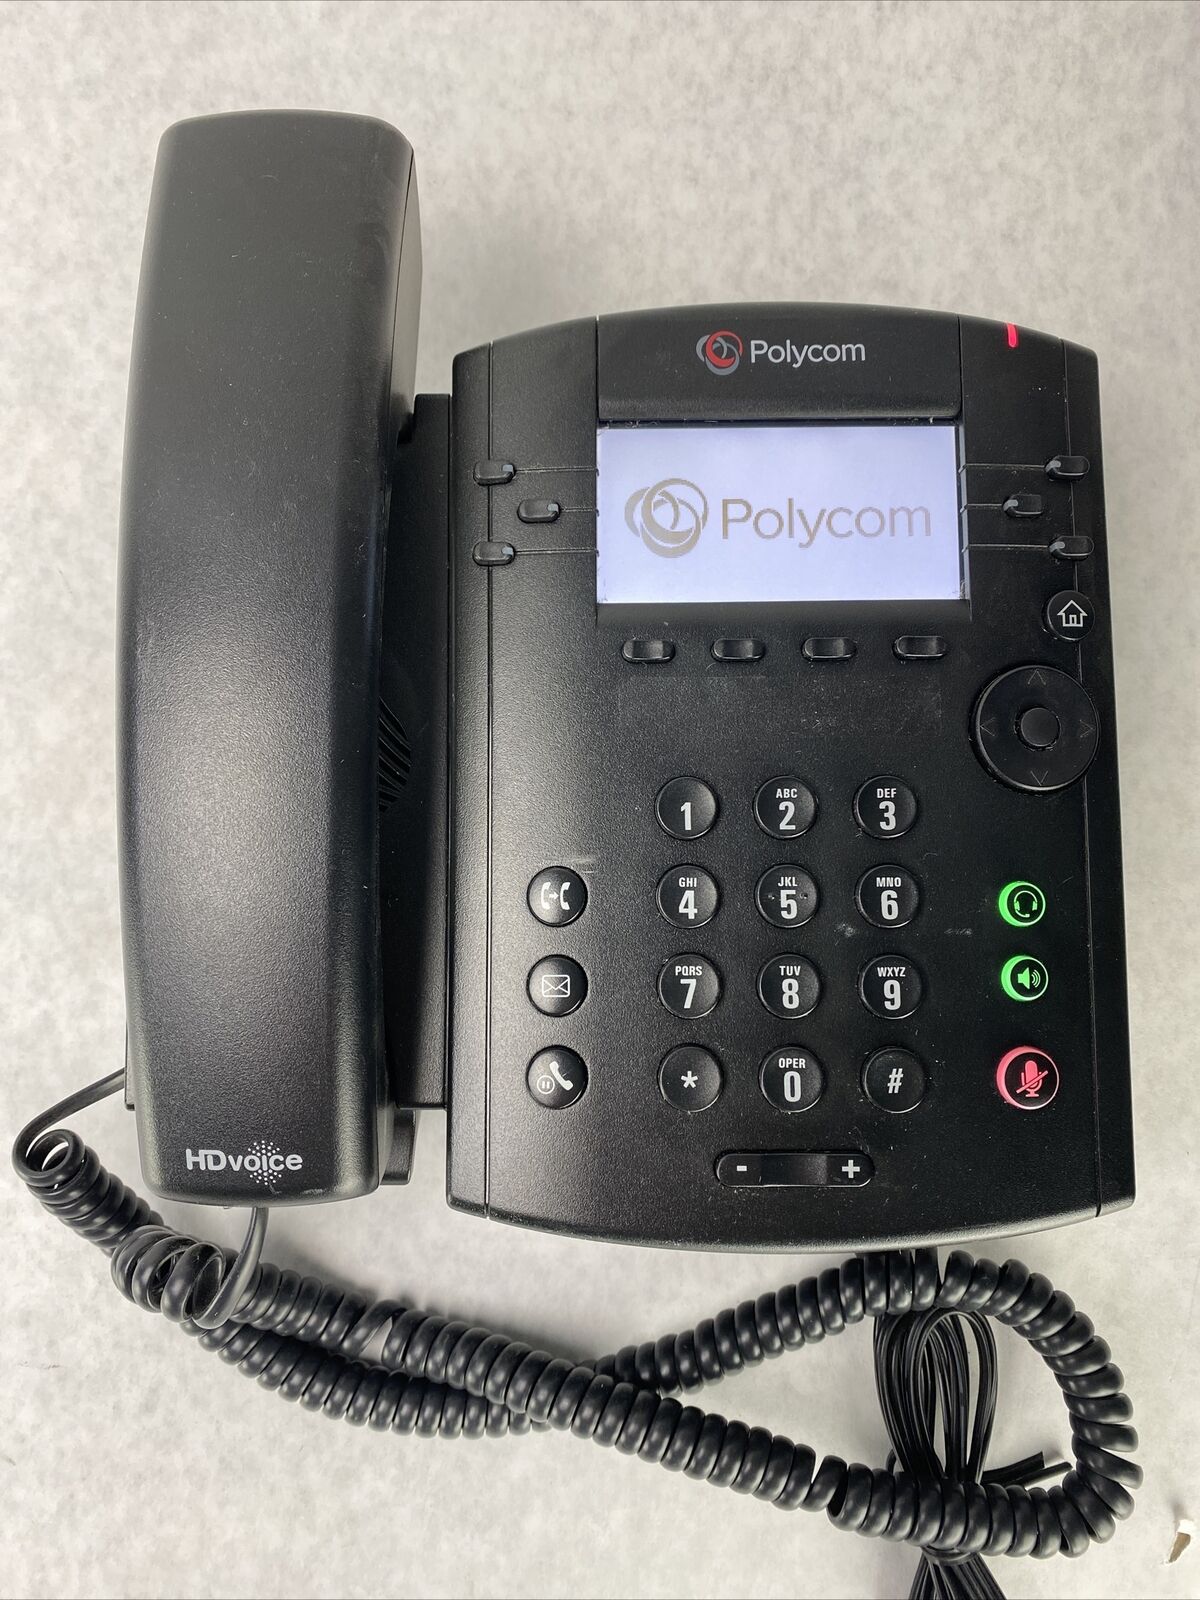 Polycom 2201-46161-001 VVX 310 IP VOIP SIP POE Telephone + Stand + AC Adapter